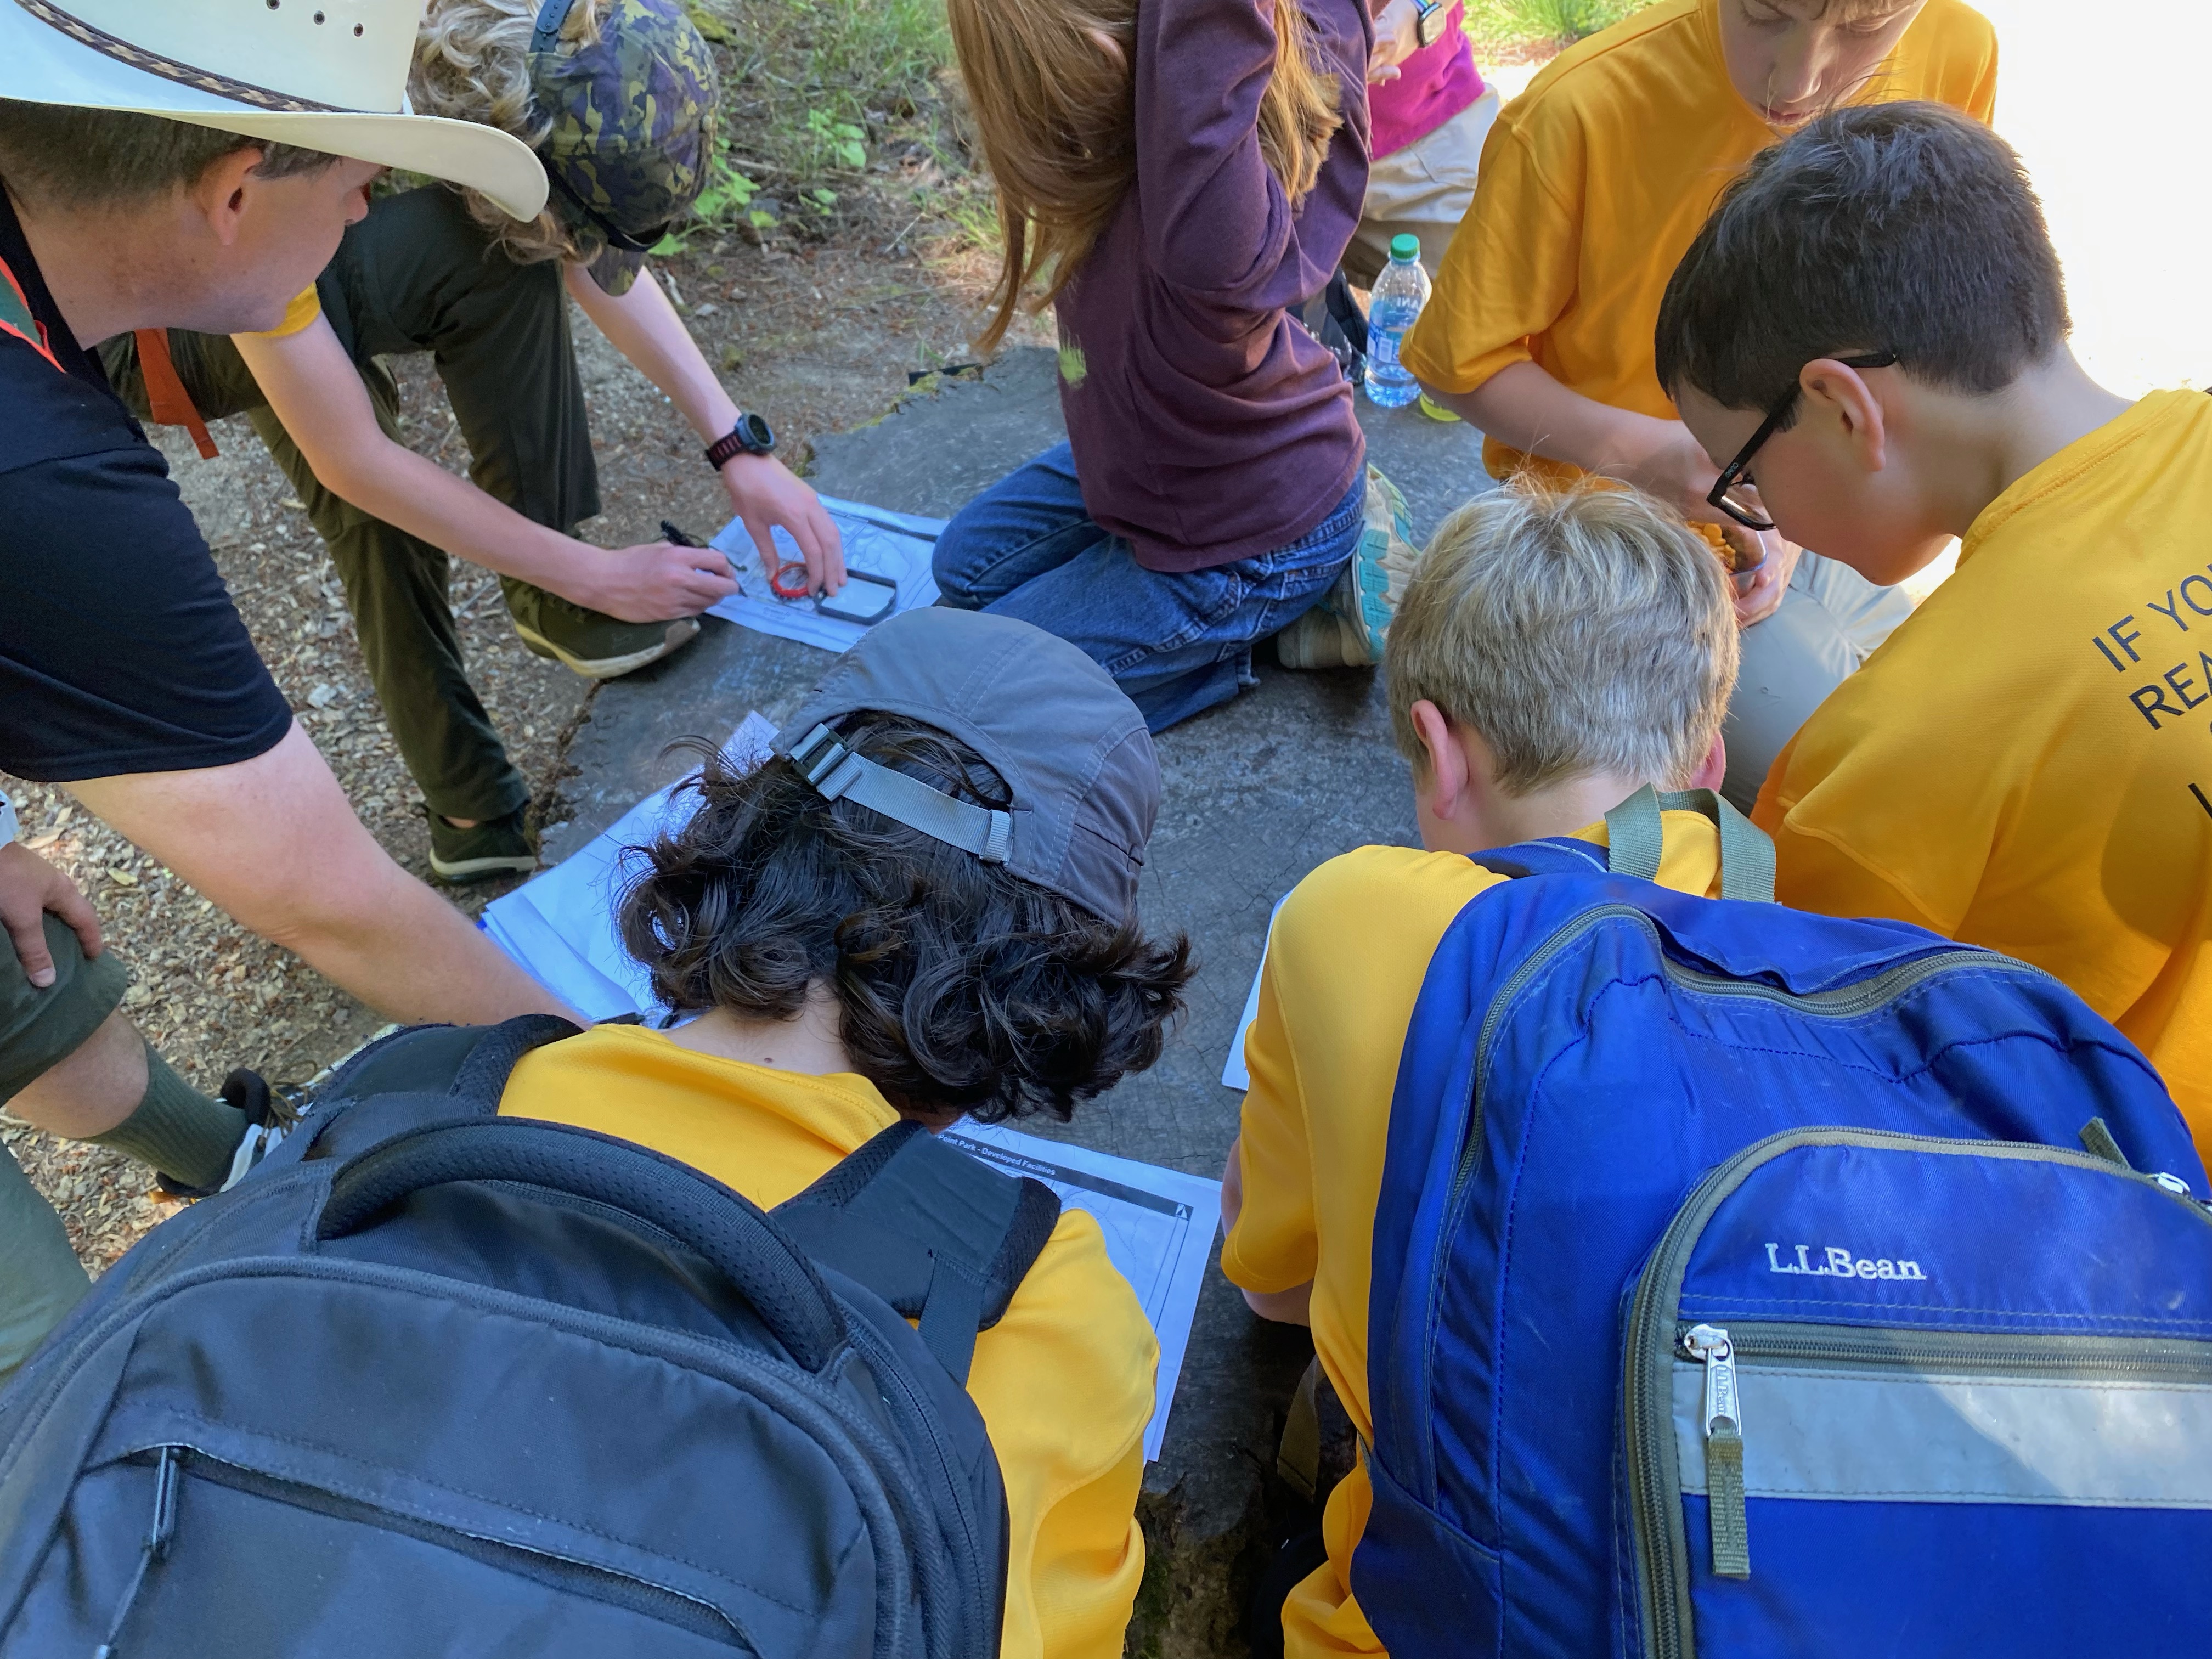 Scouts leaning in a circle using a map and compass.